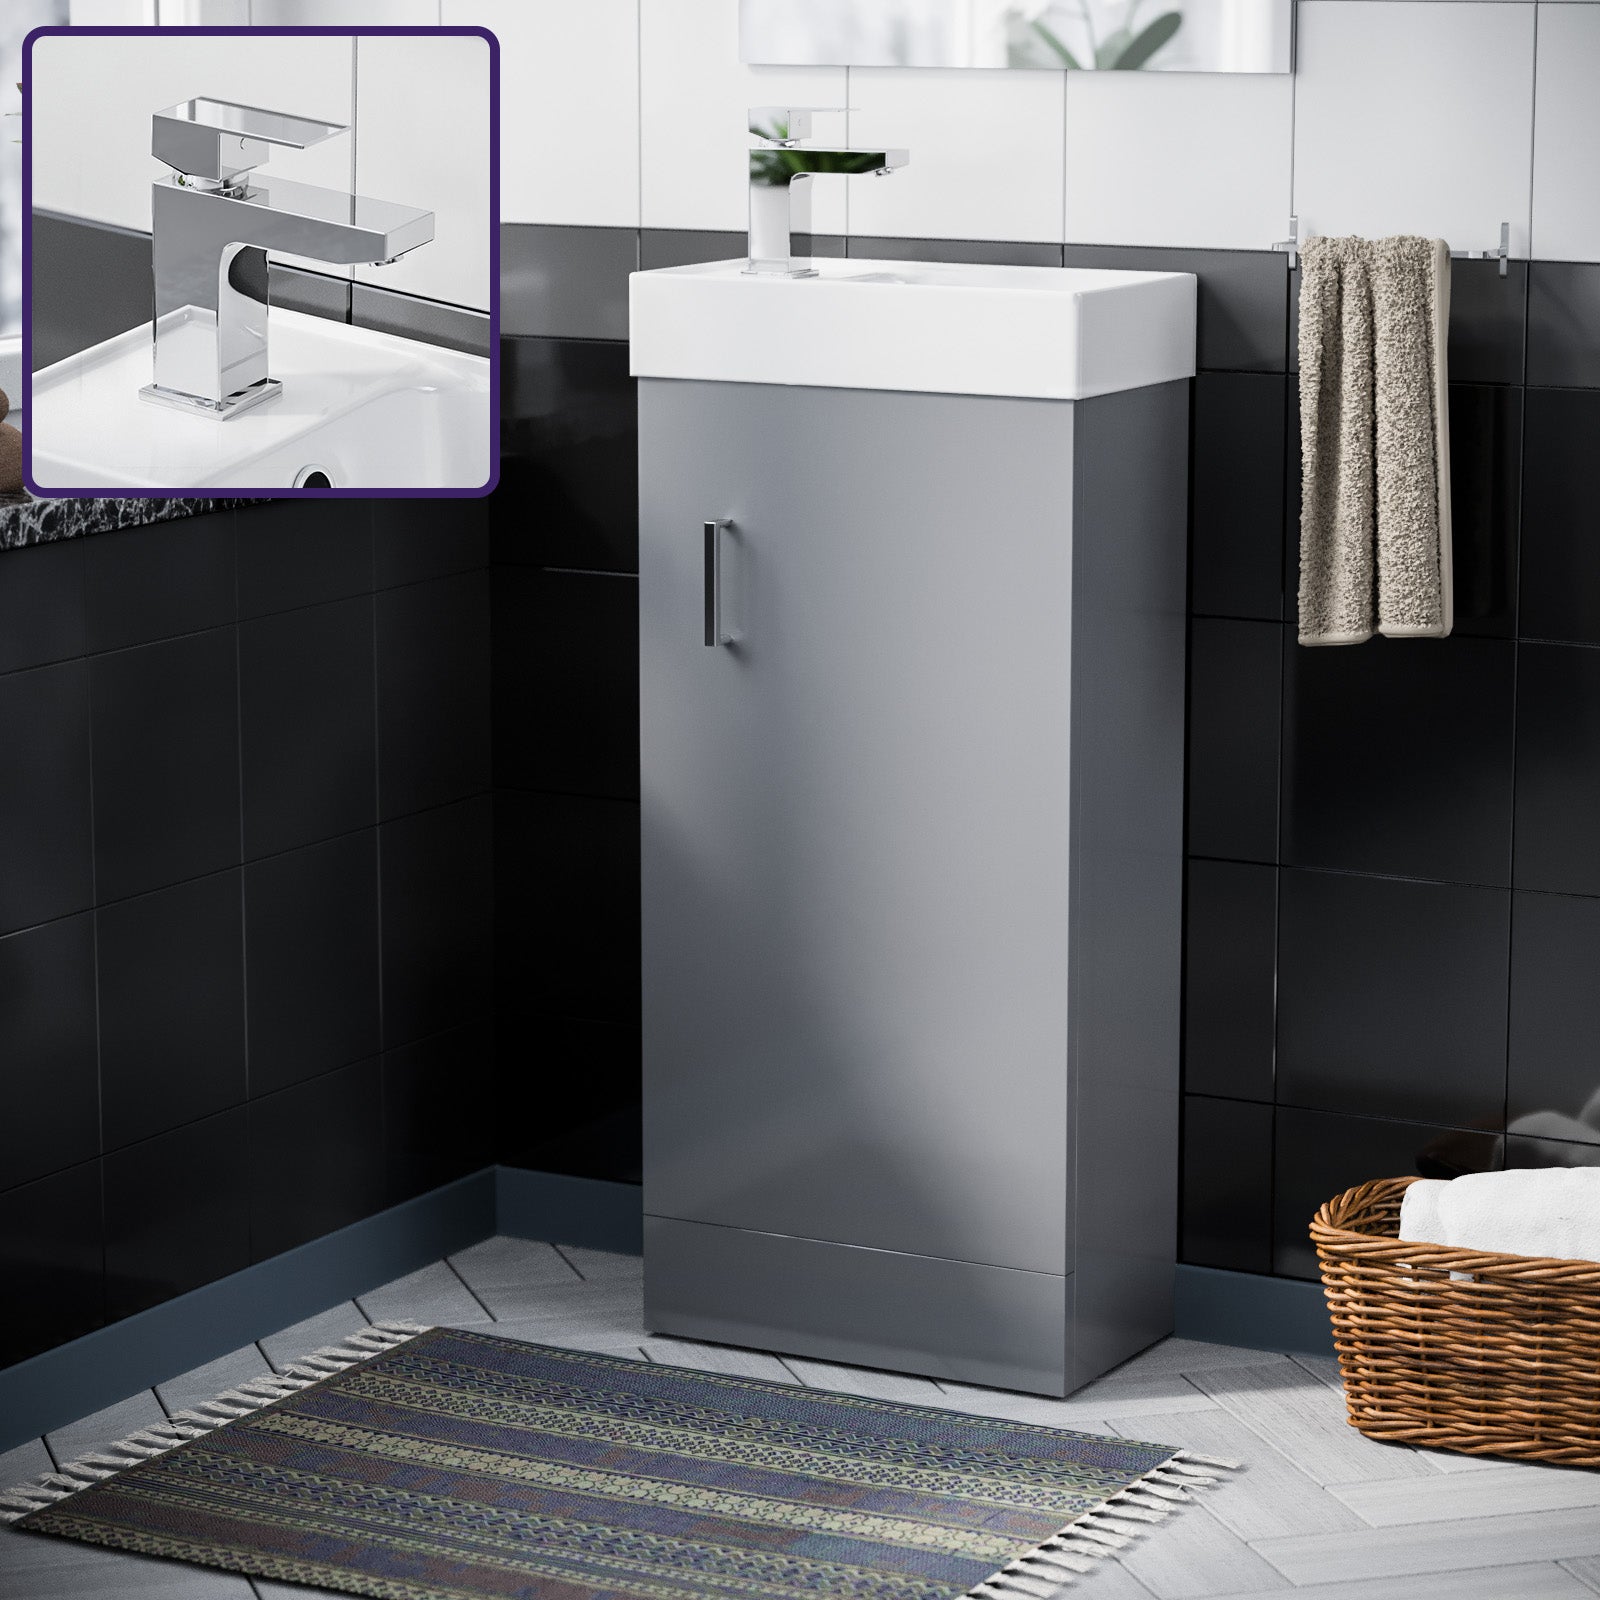 Nanuya 400mm Light Grey Cloakroom Vanity Basin Unit with Mixer Tap and Waste